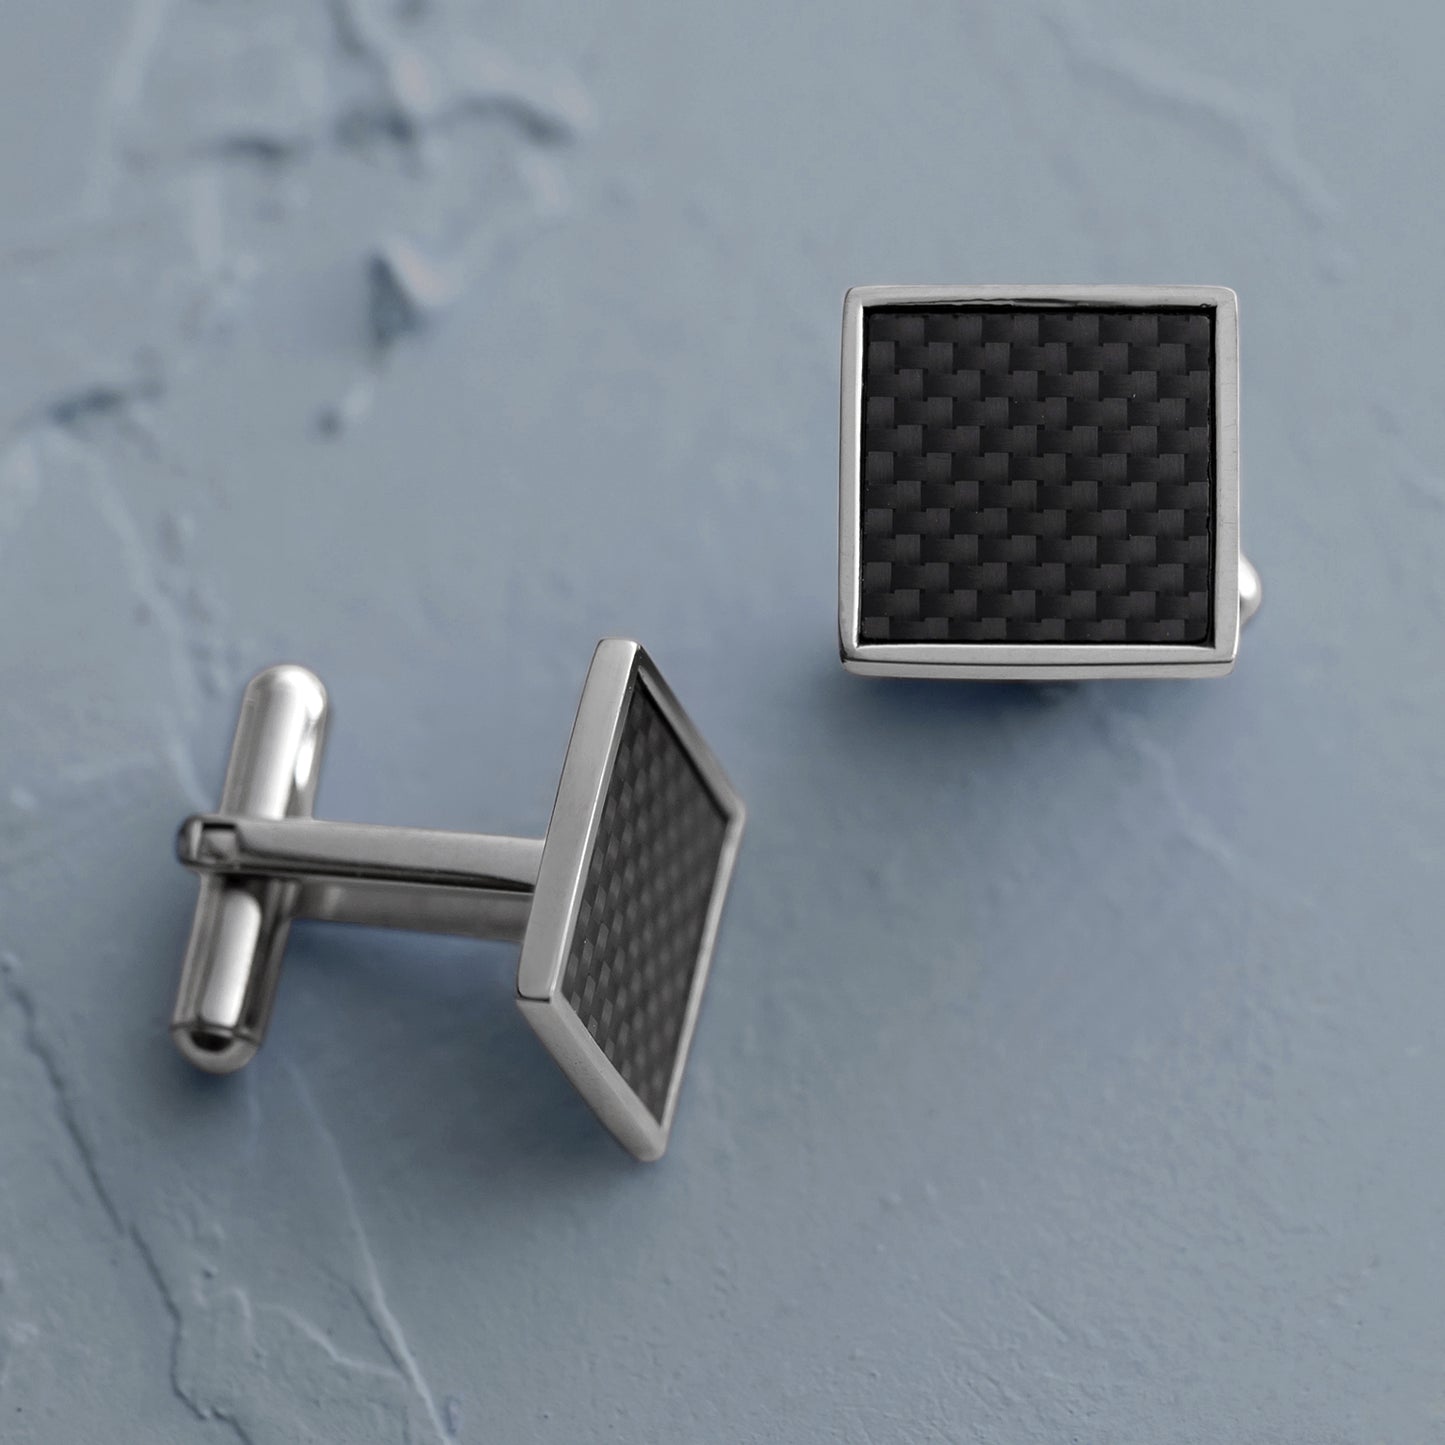 Stainless Steel & Carbon Fiber Square Cuff Links for Men - Stylish Wedding, Anniversary, Birthday or Father's Day Gift